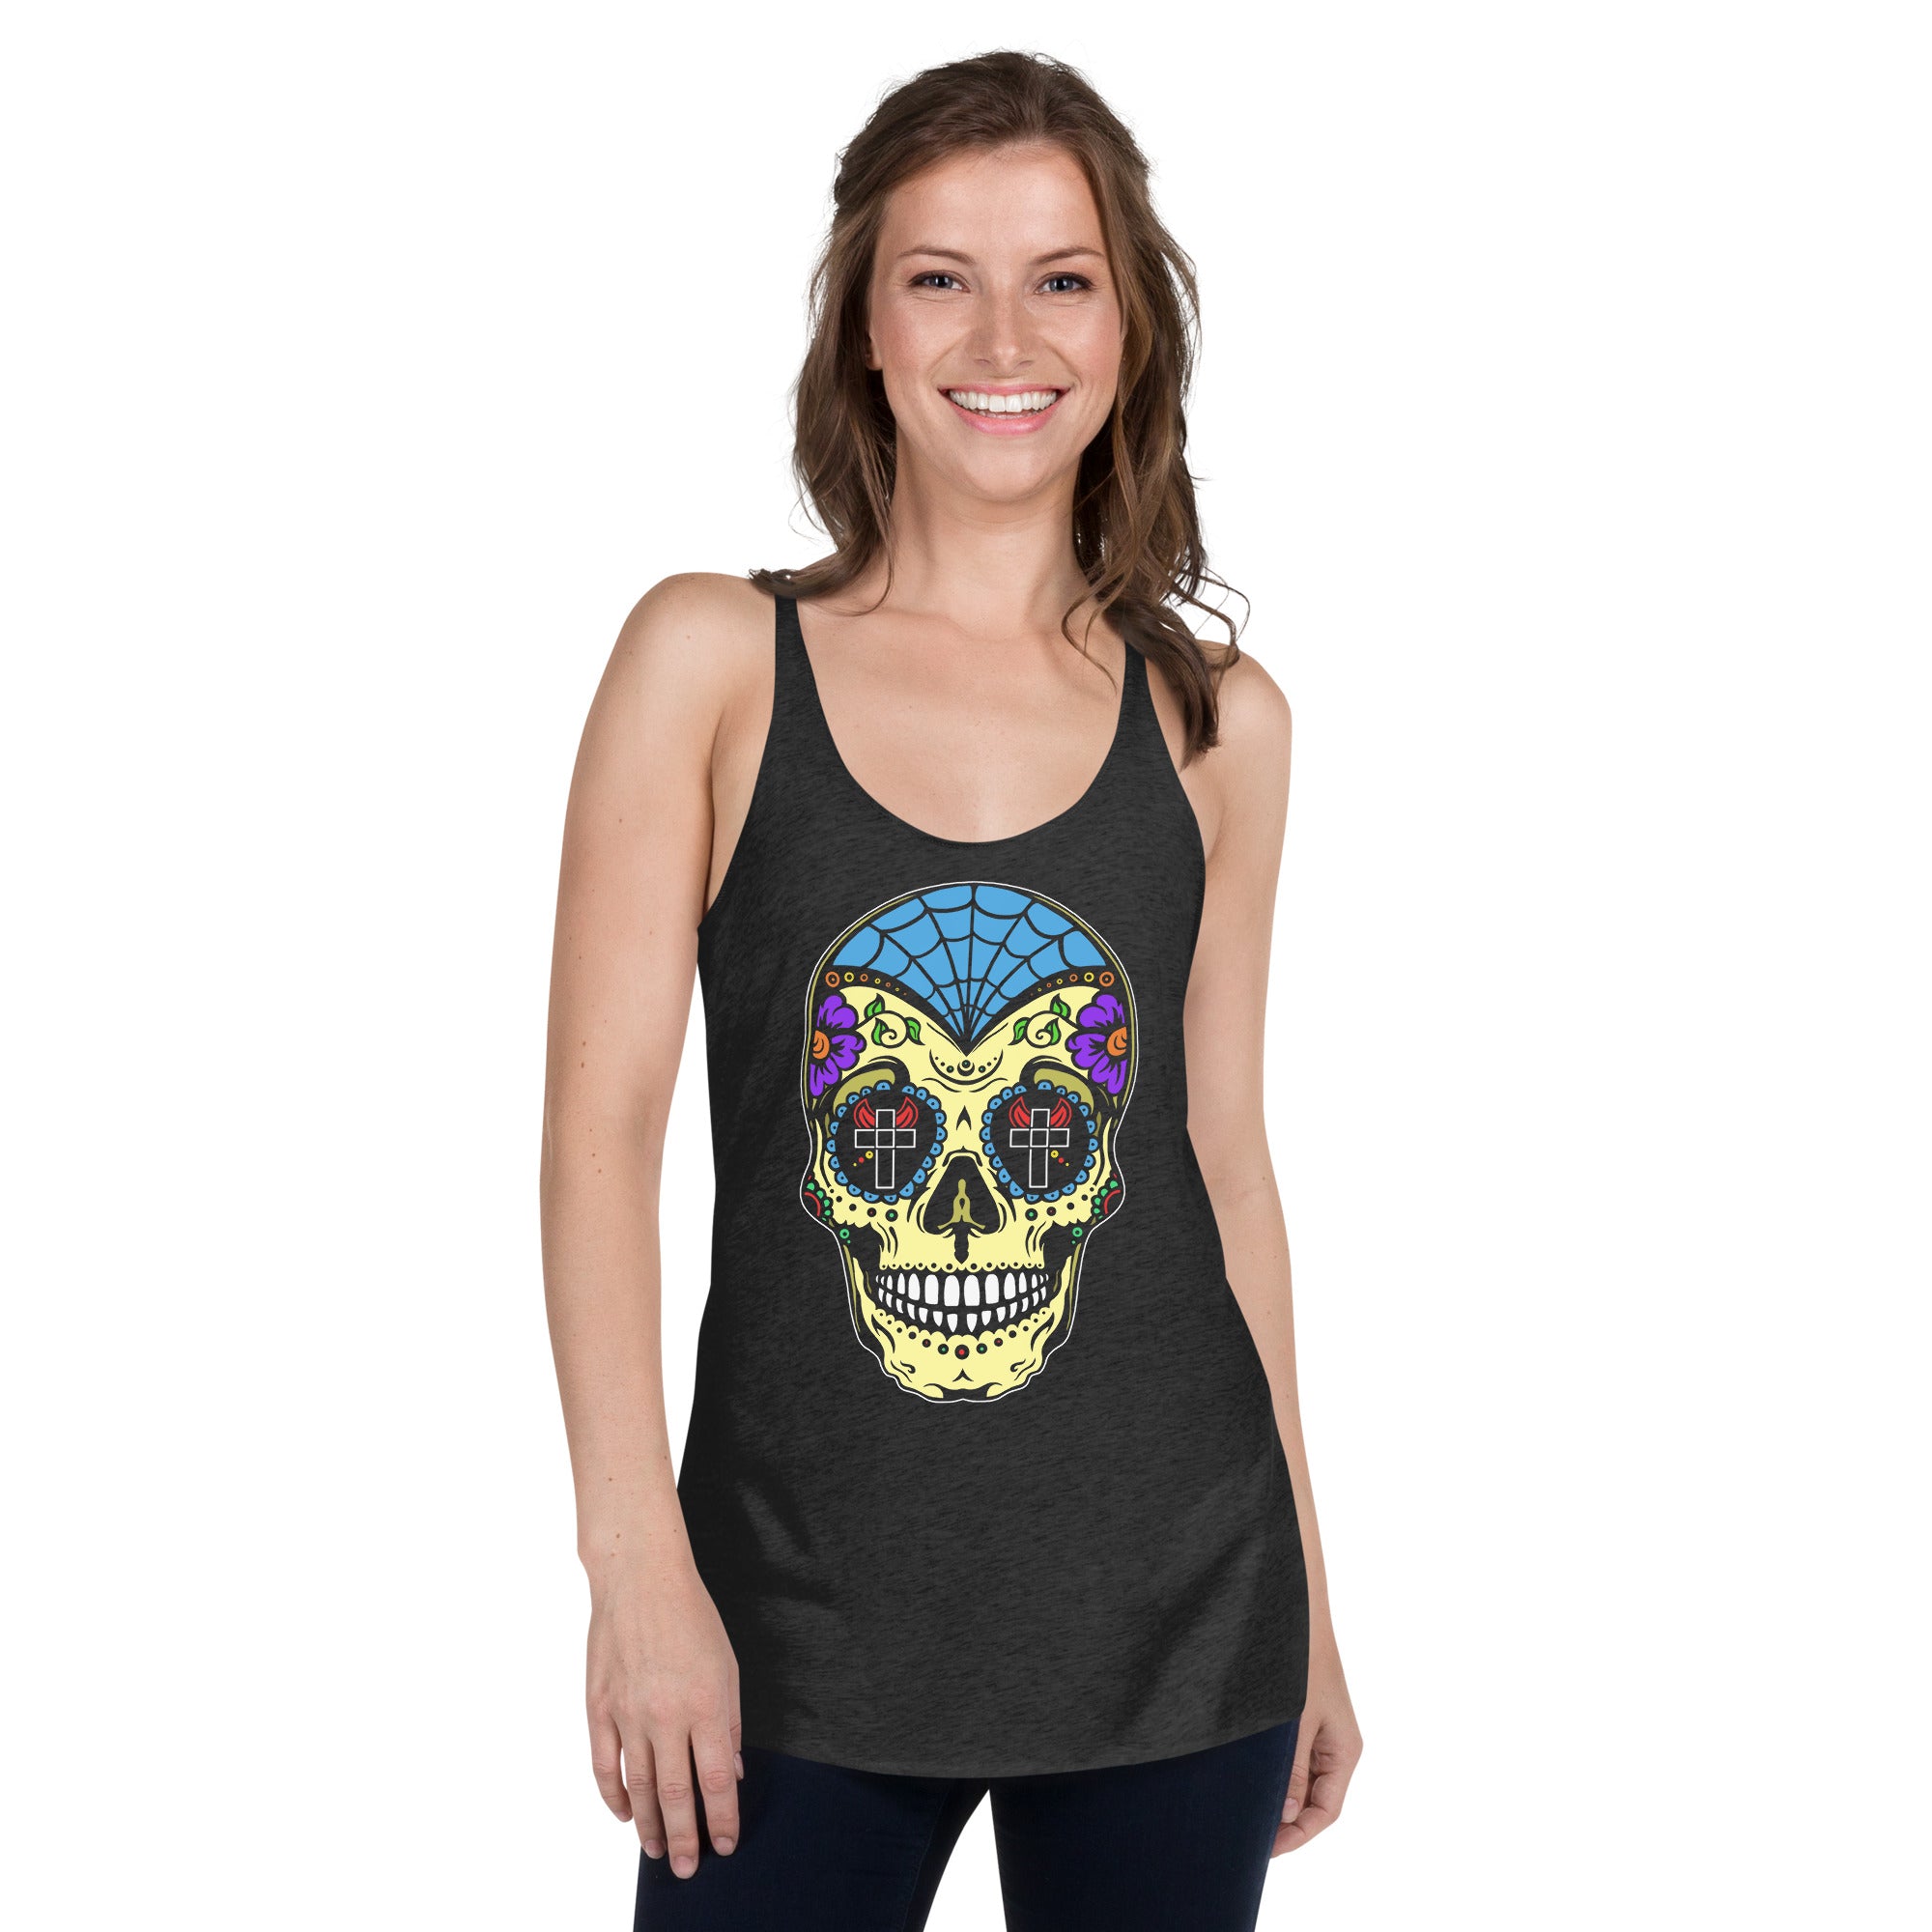 Colorful Sugar Skull Day of the Dead Halloween Women's Racerback Tank Top Shirt - Edge of Life Designs